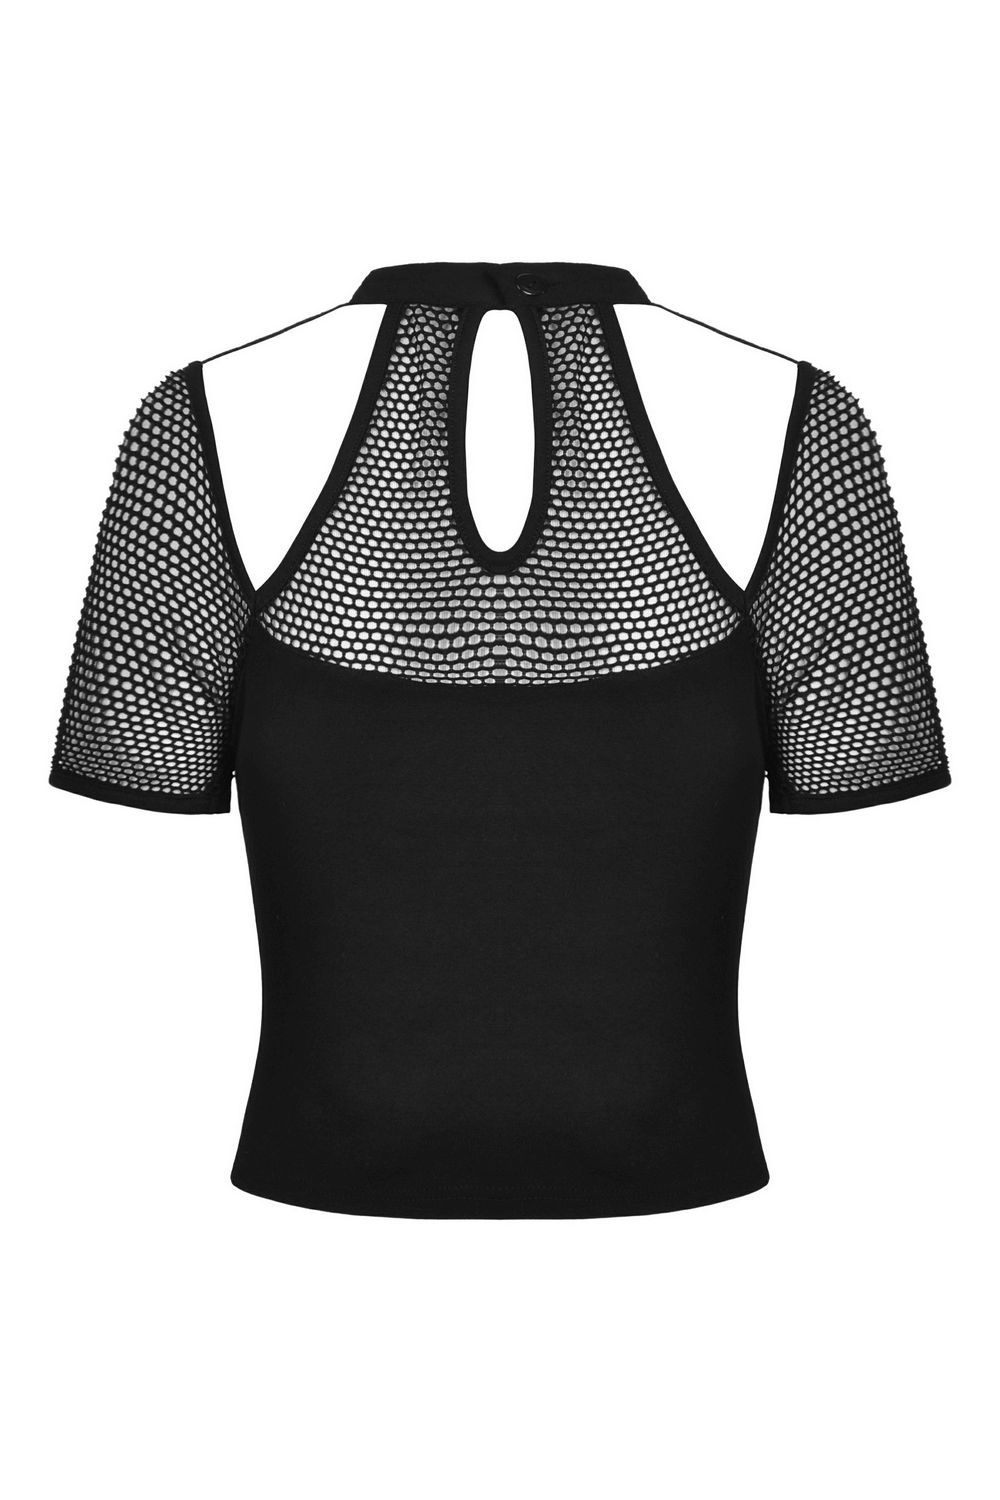 Punk Cutout T-shirt with Mesh Sleeves and Lace-Up Front